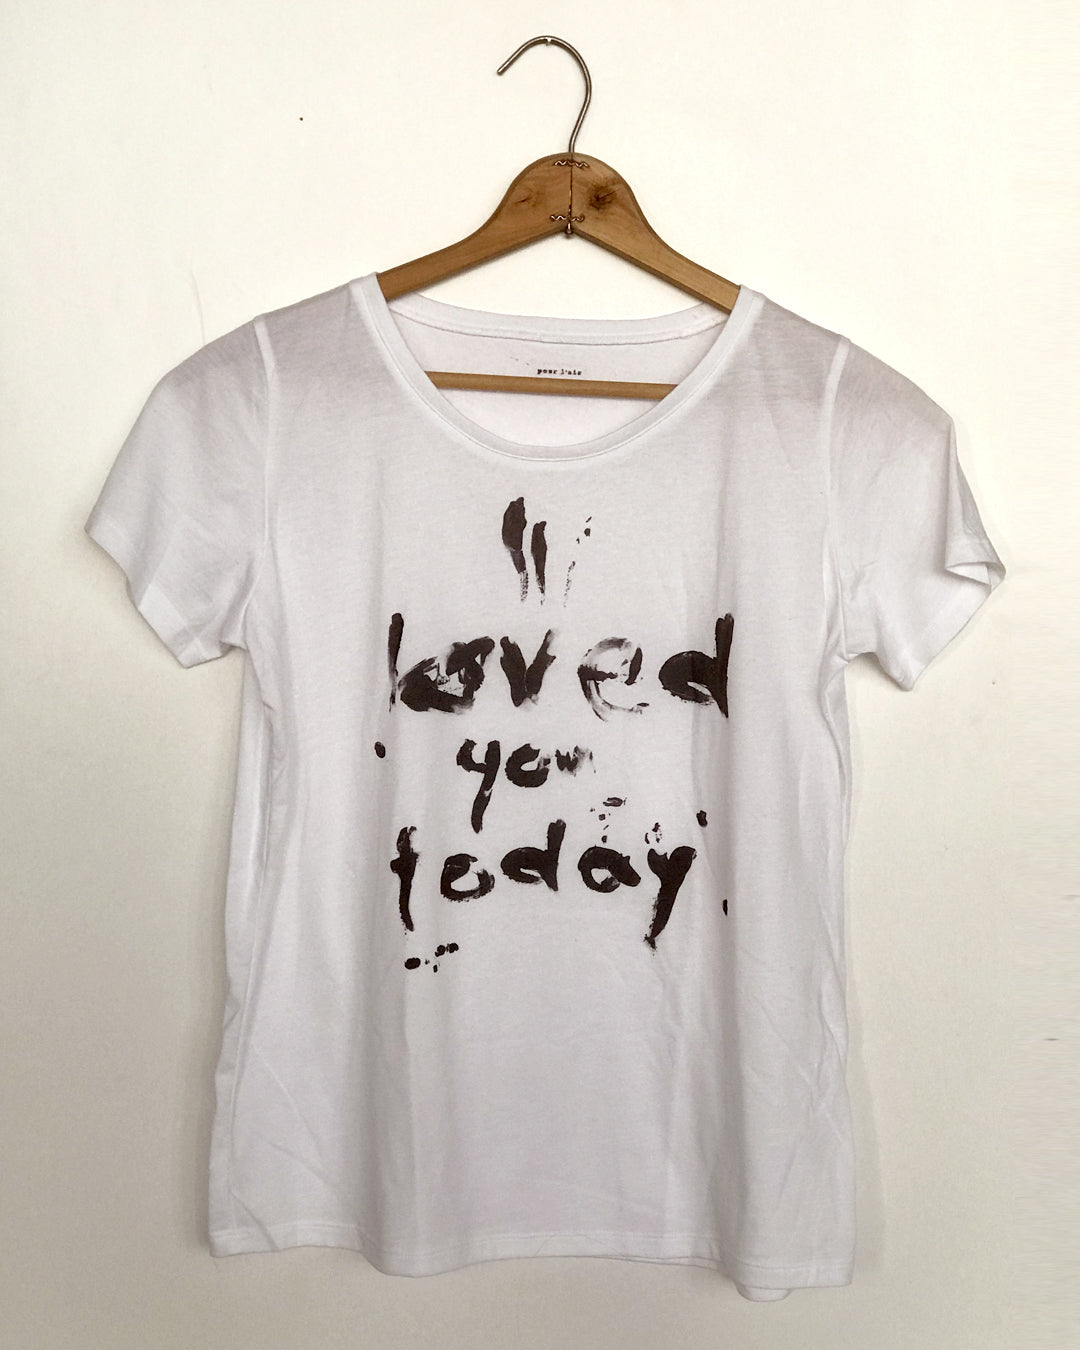 Tshirt inspired by the positive punk vibes of Vivienne Westwood, out I loved you today hand painted saying is a nod to the 70s and everyday good vibes. 